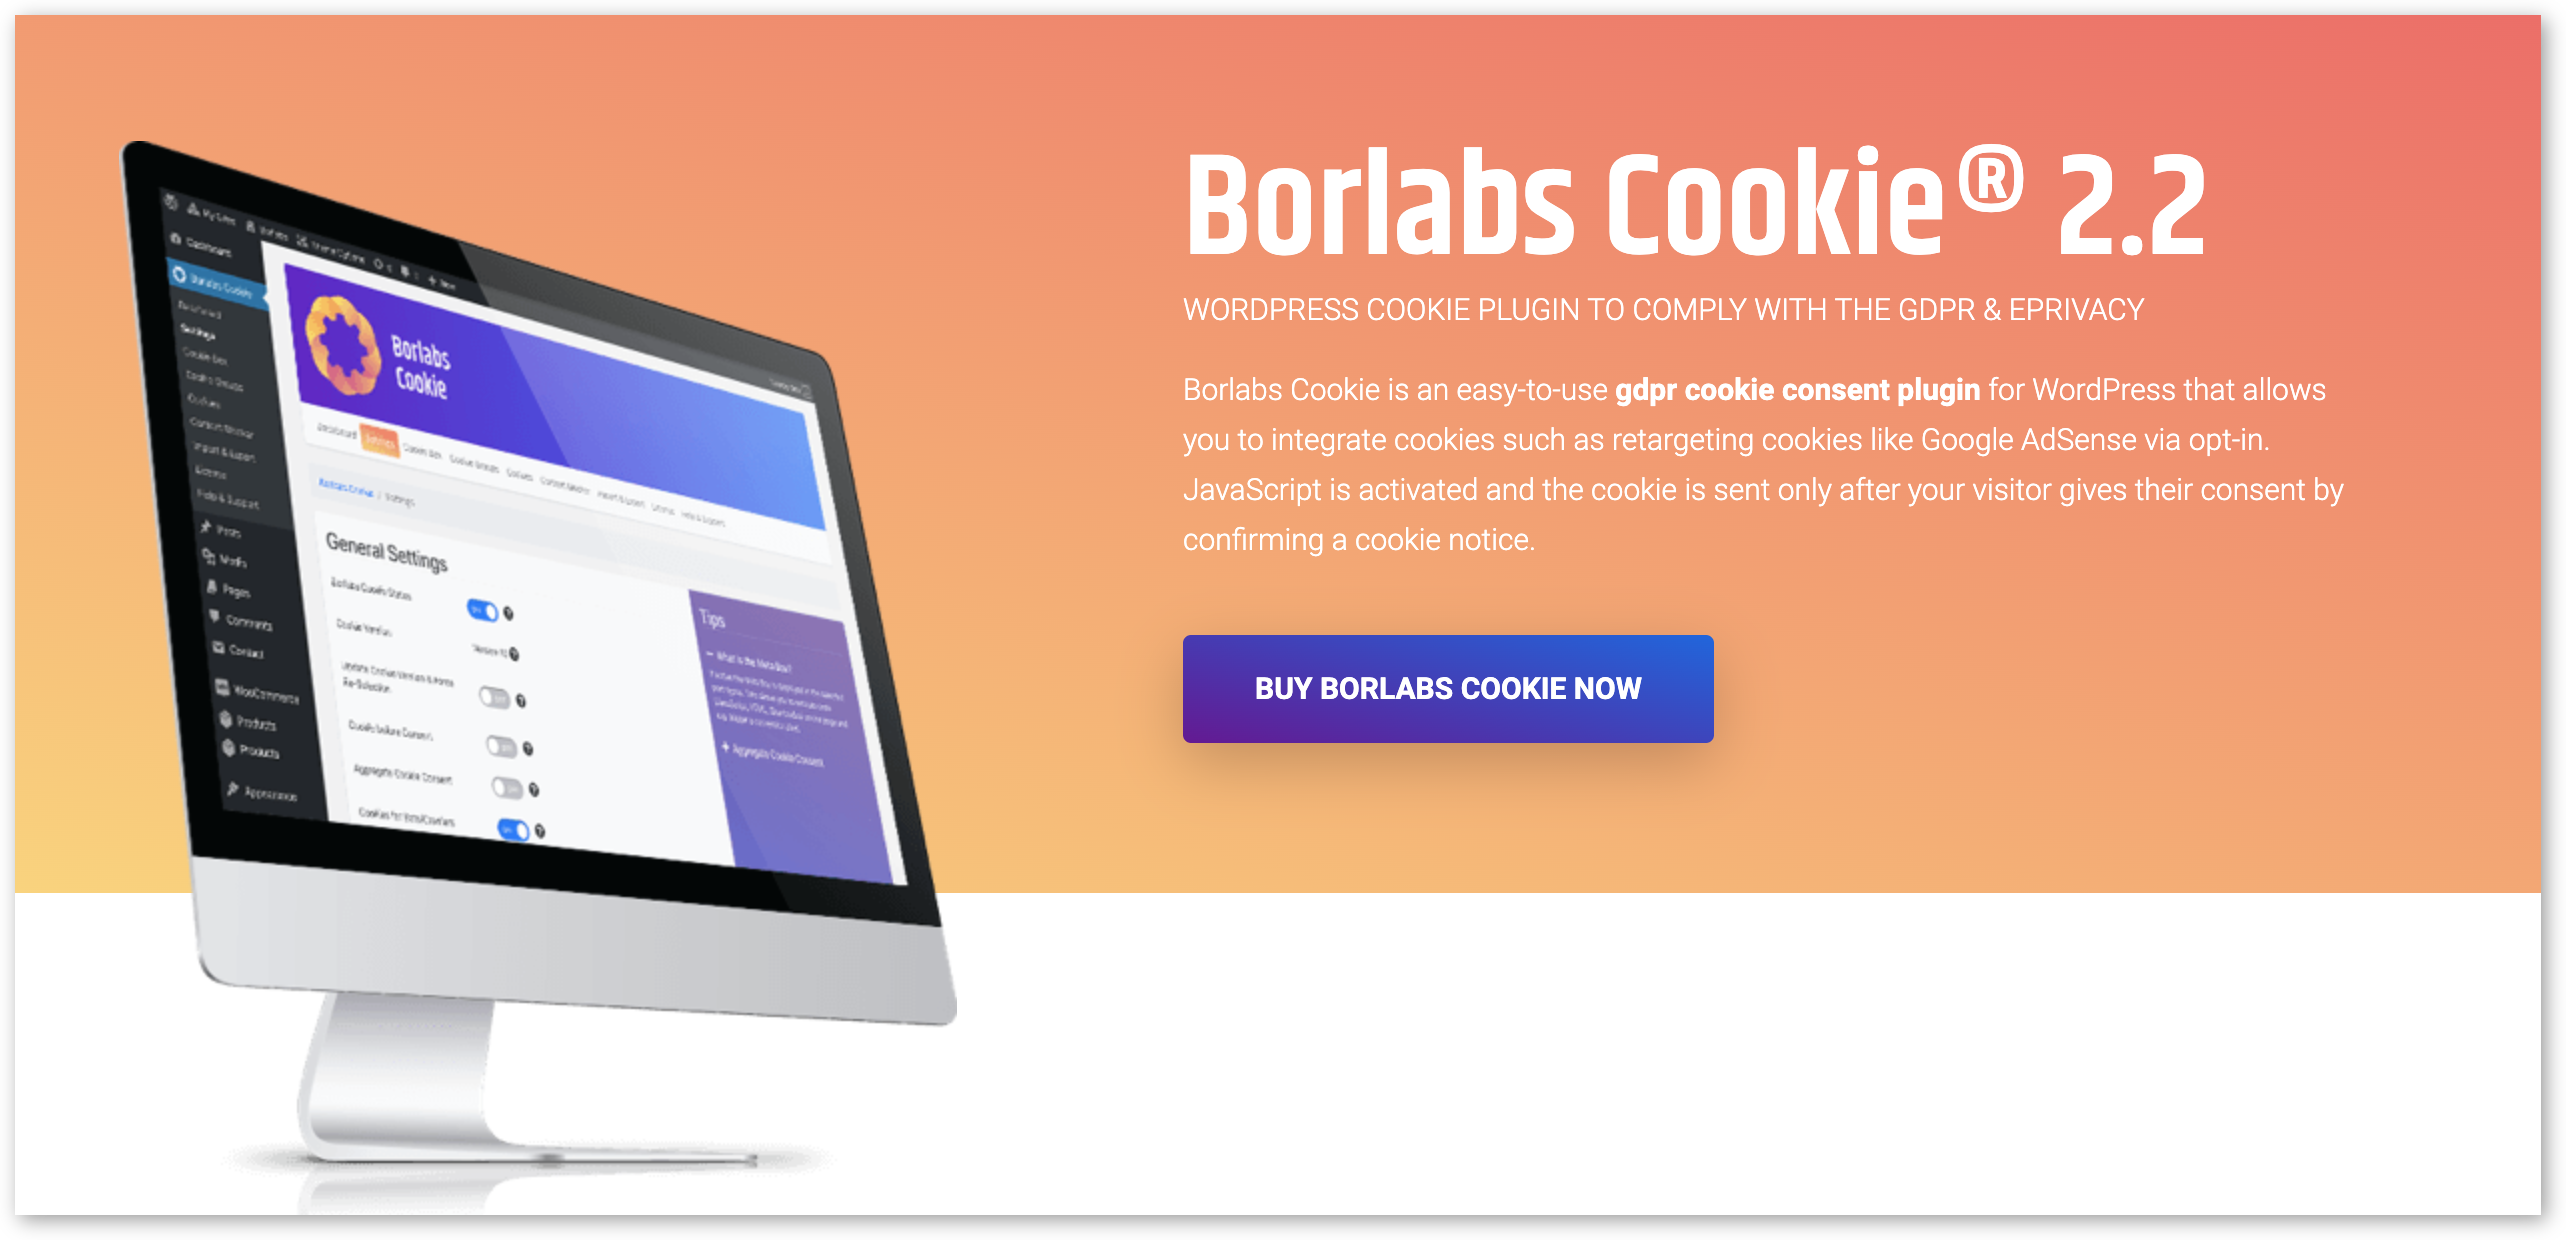 Borlabs is a CMP - and it shows new visitors its own cookie requests in detail.